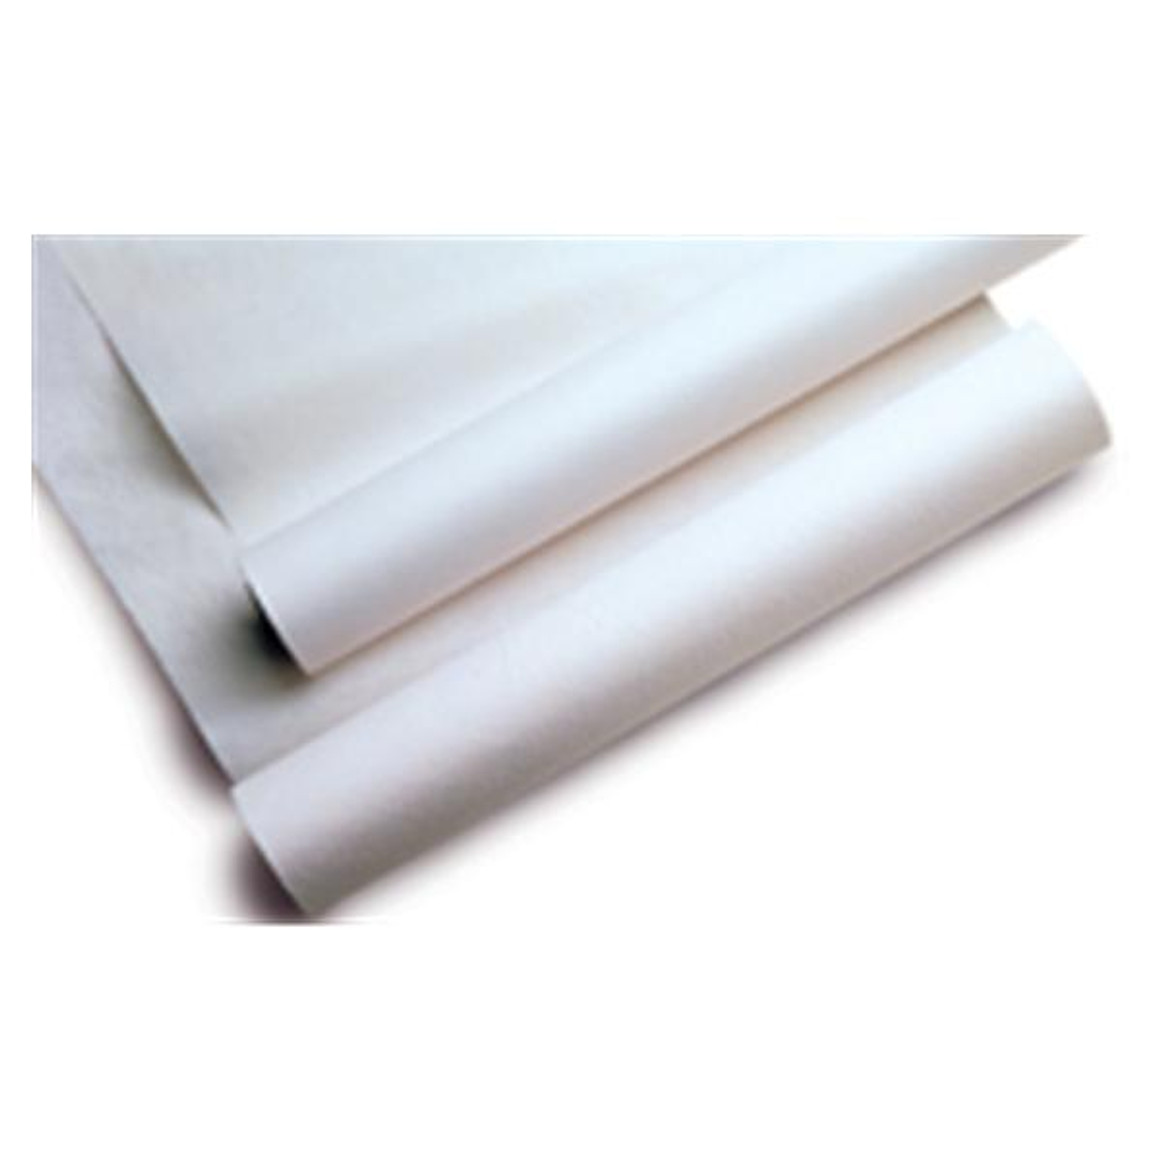 Table Paper; 14 x 225, Smooth, White (12/case)